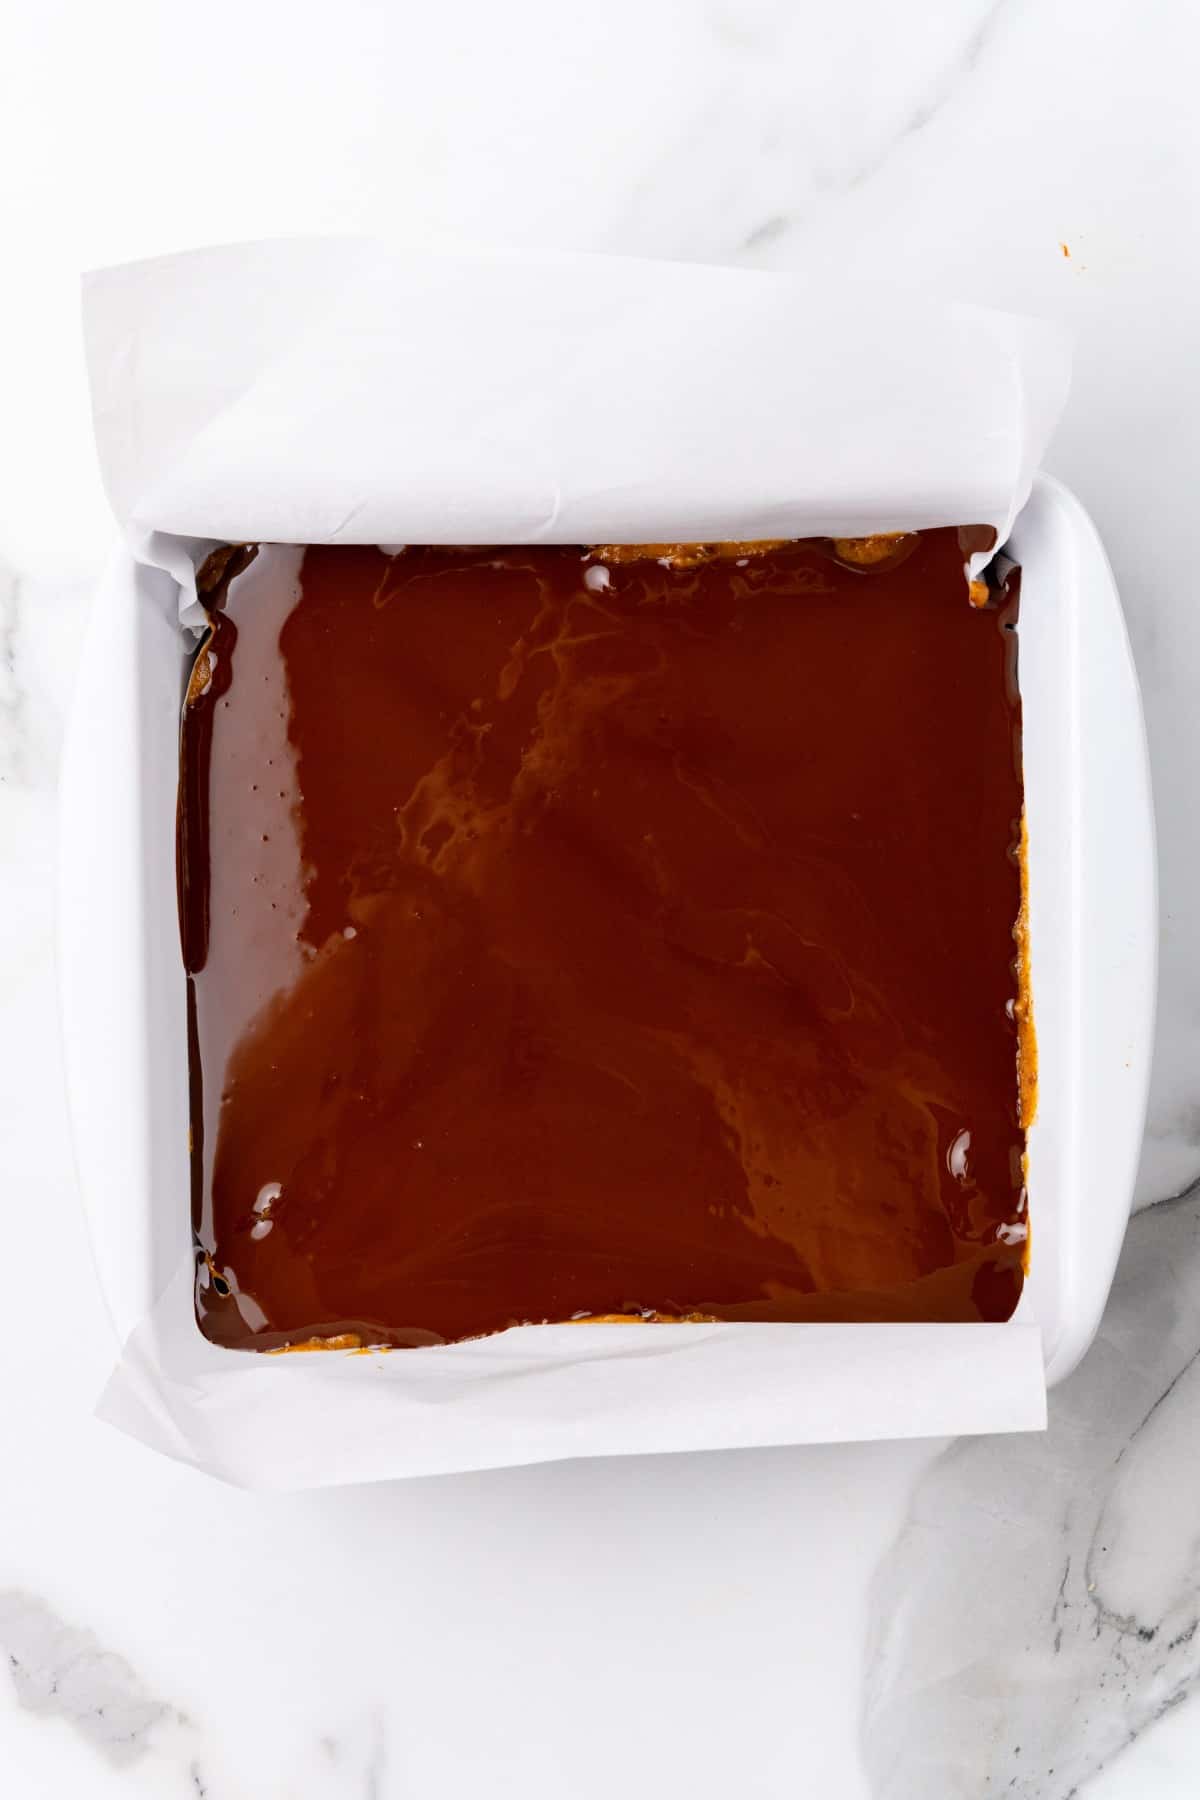 Melted chocolate being spread into white baking pan. 